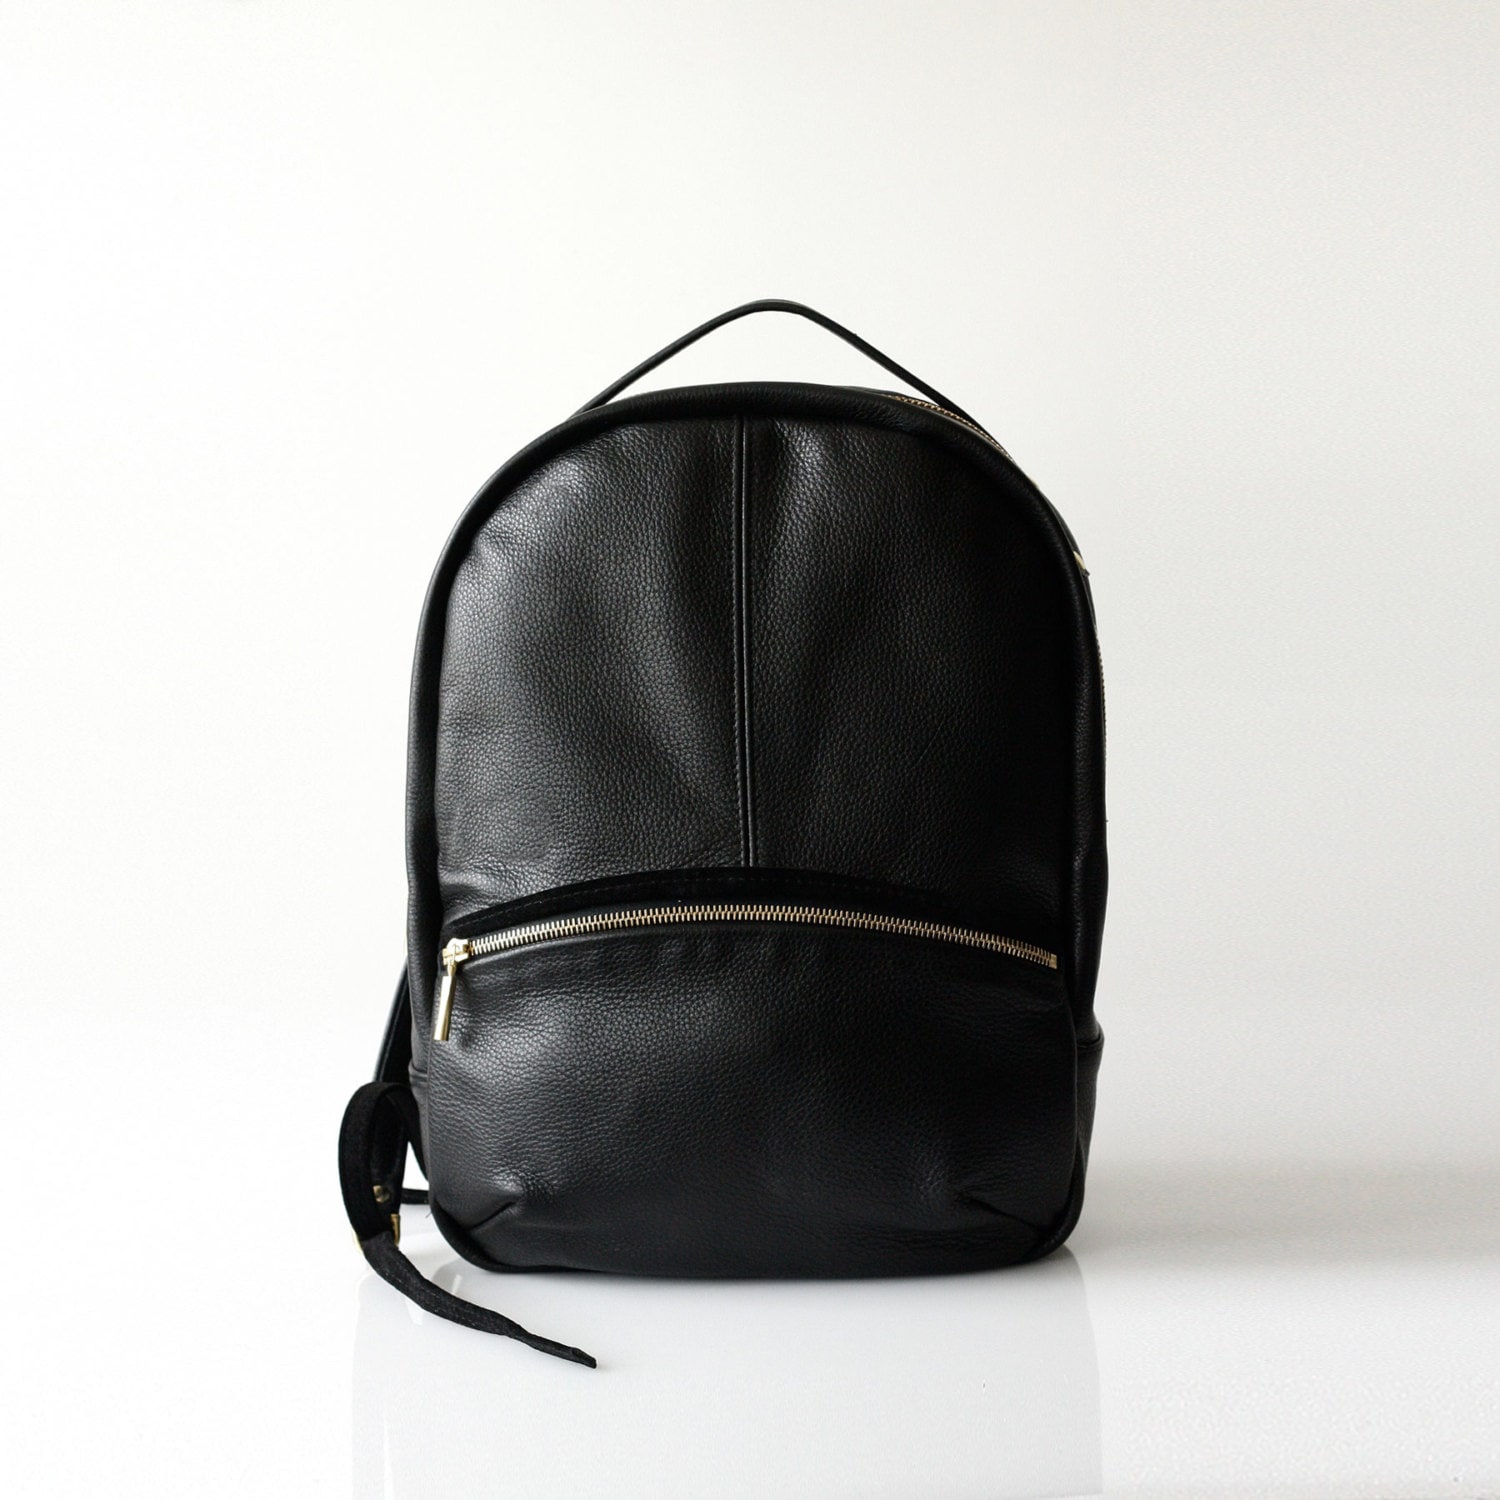 Soft Pebbled Leather Backpack OPELLE Kanye leather backpack